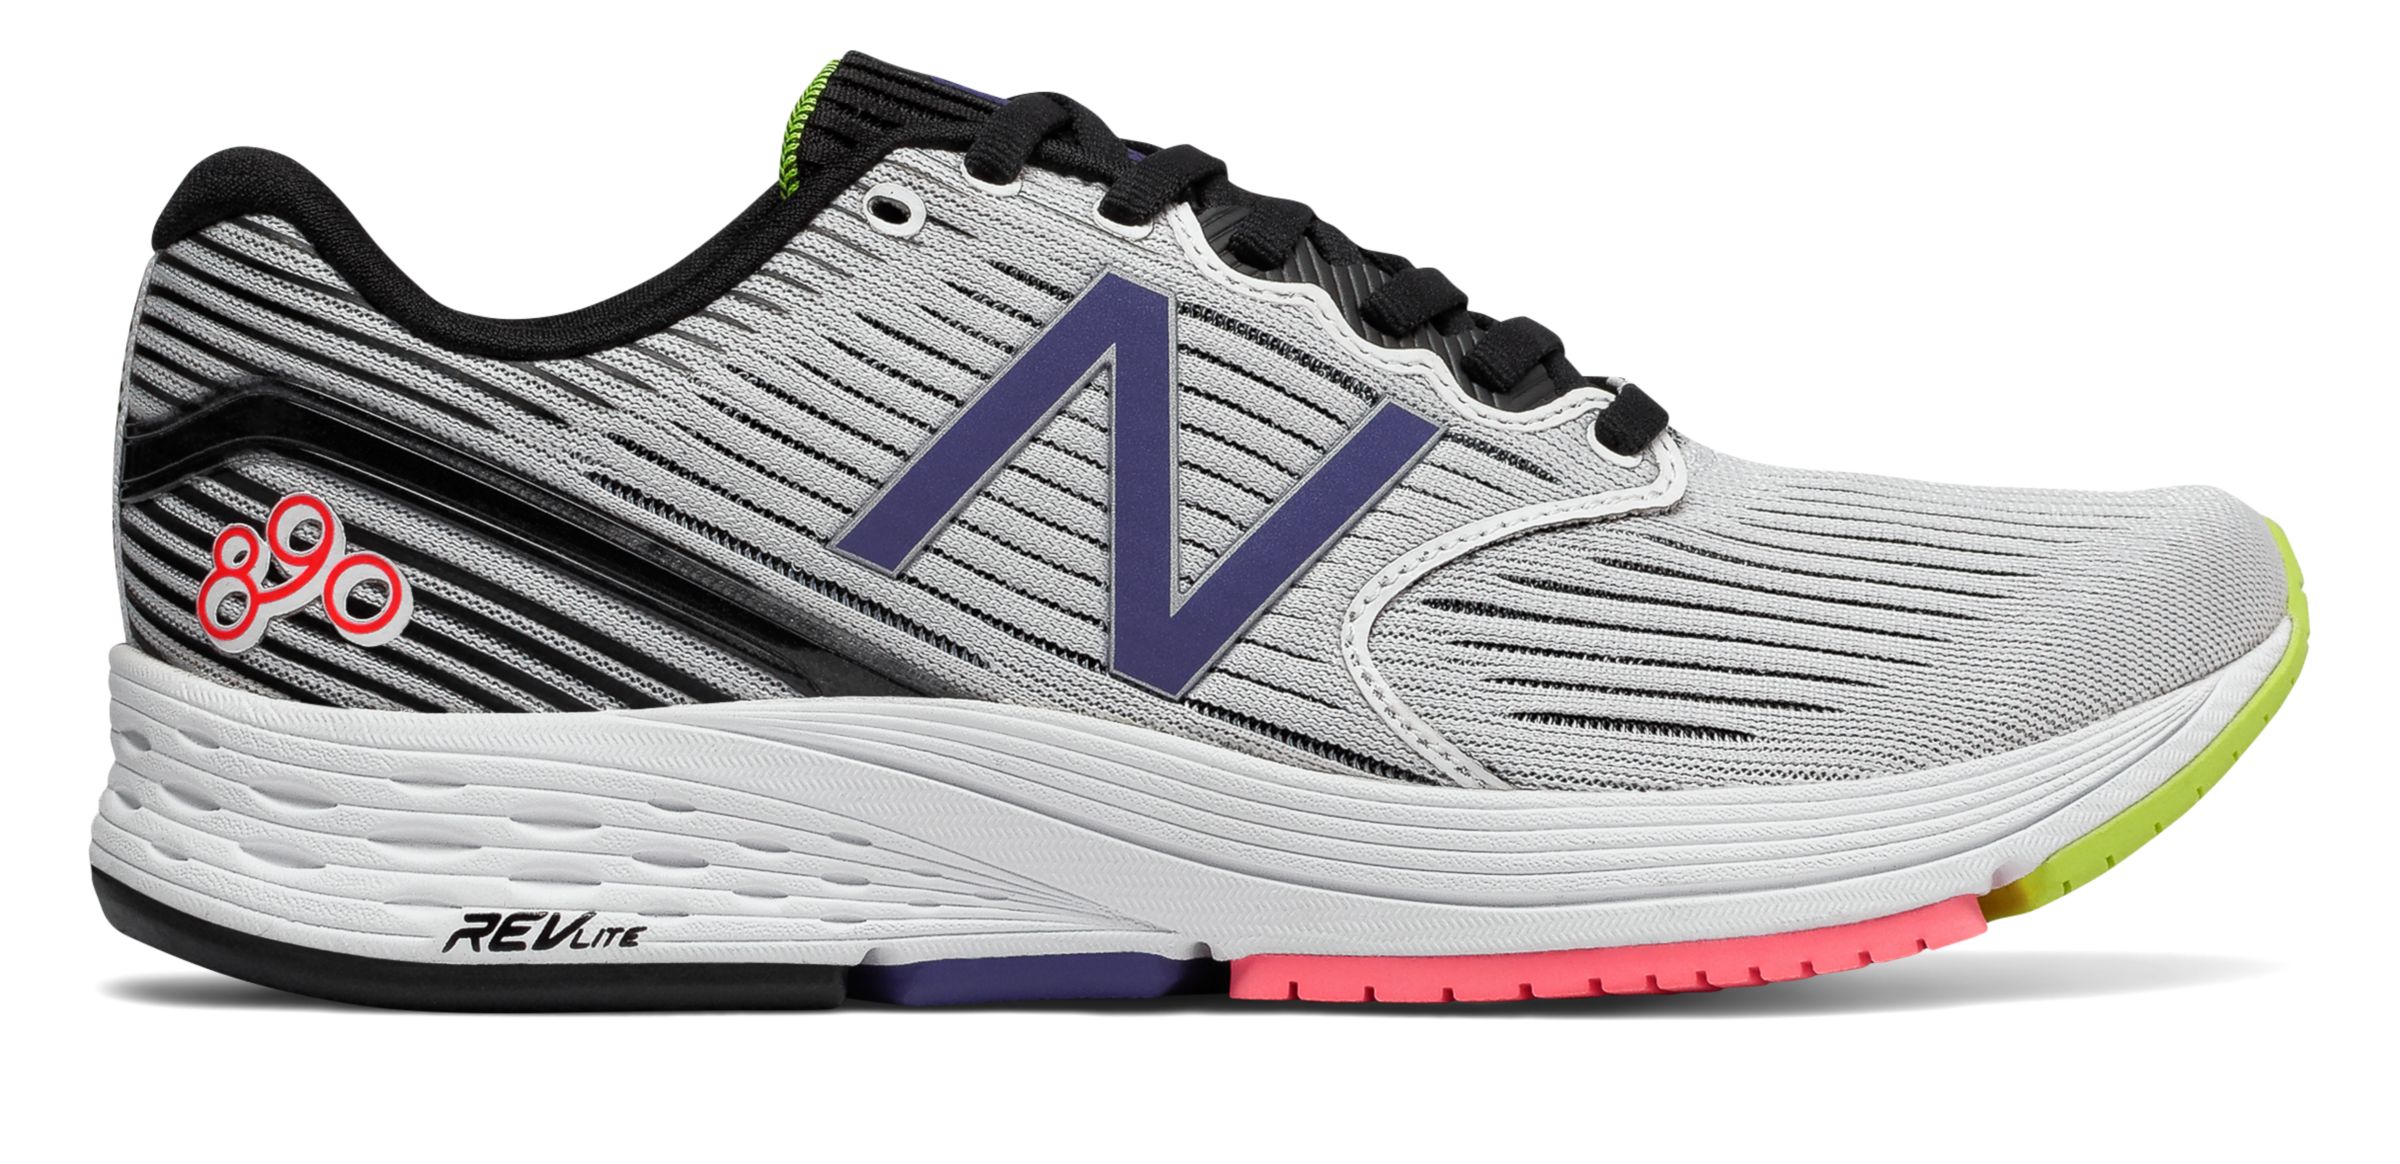 New Balance W890-V6 on Sale - Discounts Up to 62% Off on W890WB6 at Joe's New  Balance Outlet